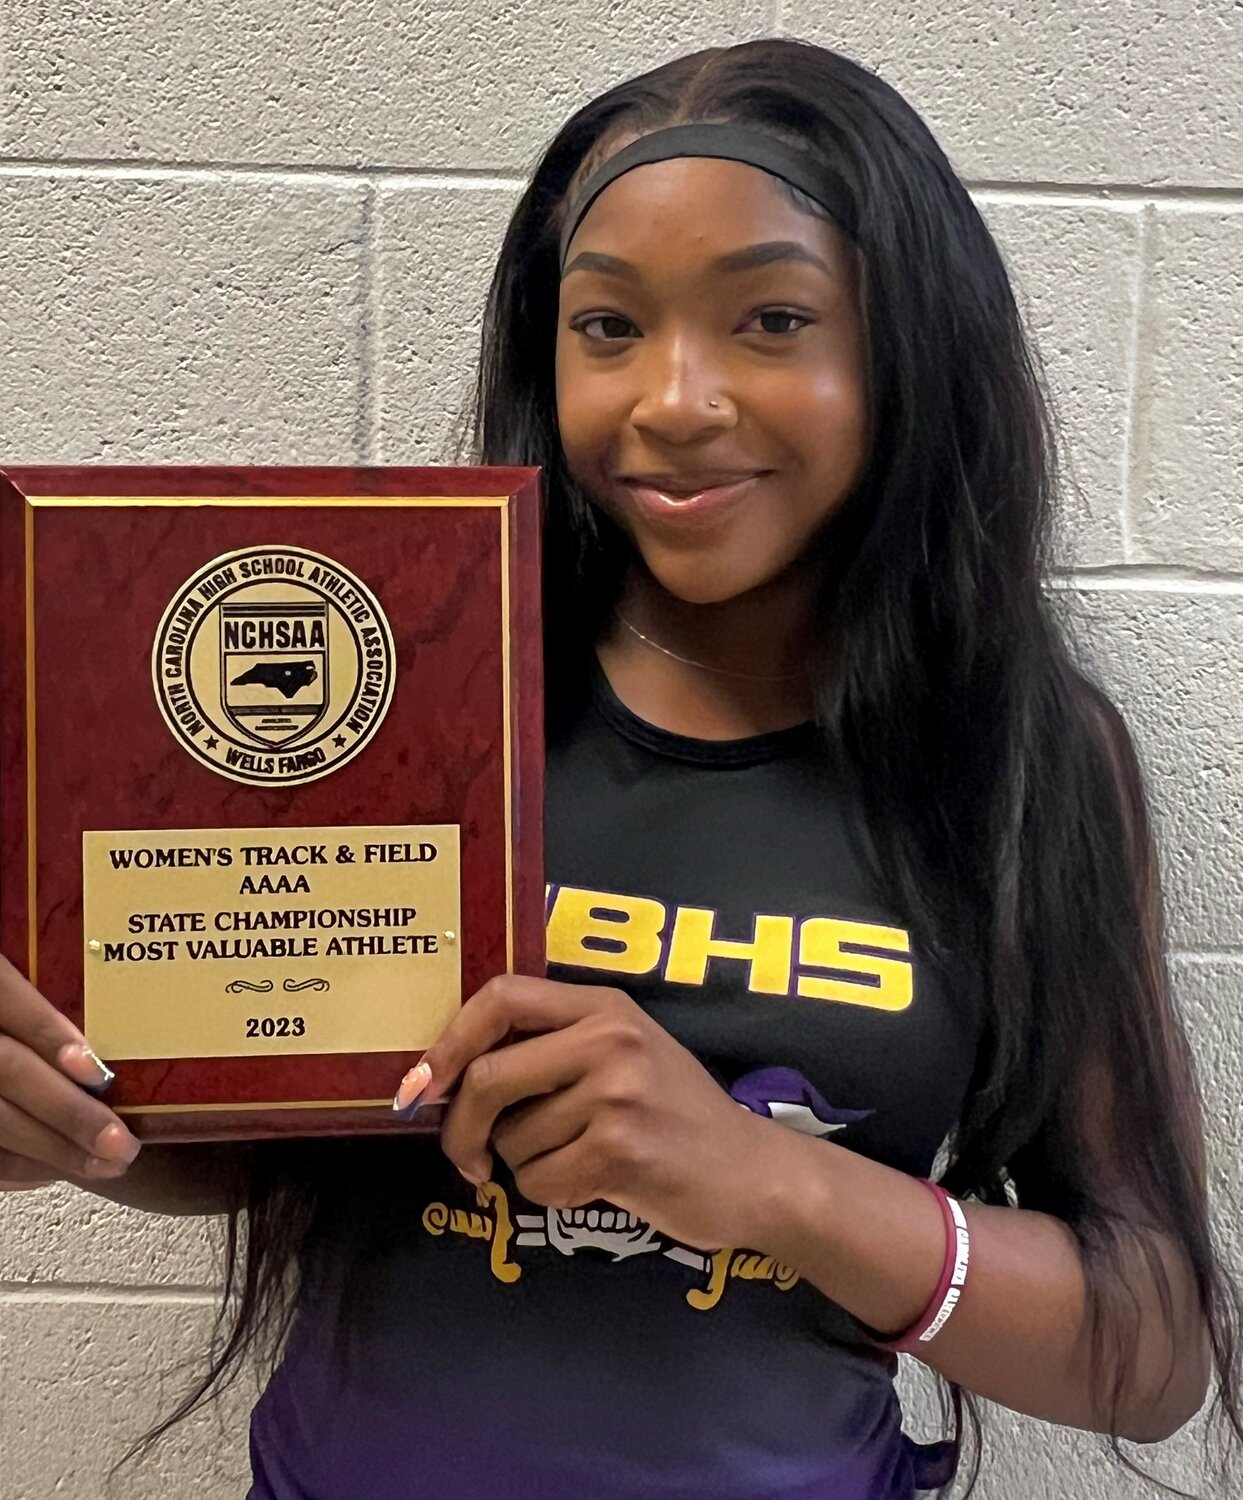 JaMeesia Ford of Jack Britt High School was one of the top individual winners from Cumberland County Schools in the track and field state championships last weekend.